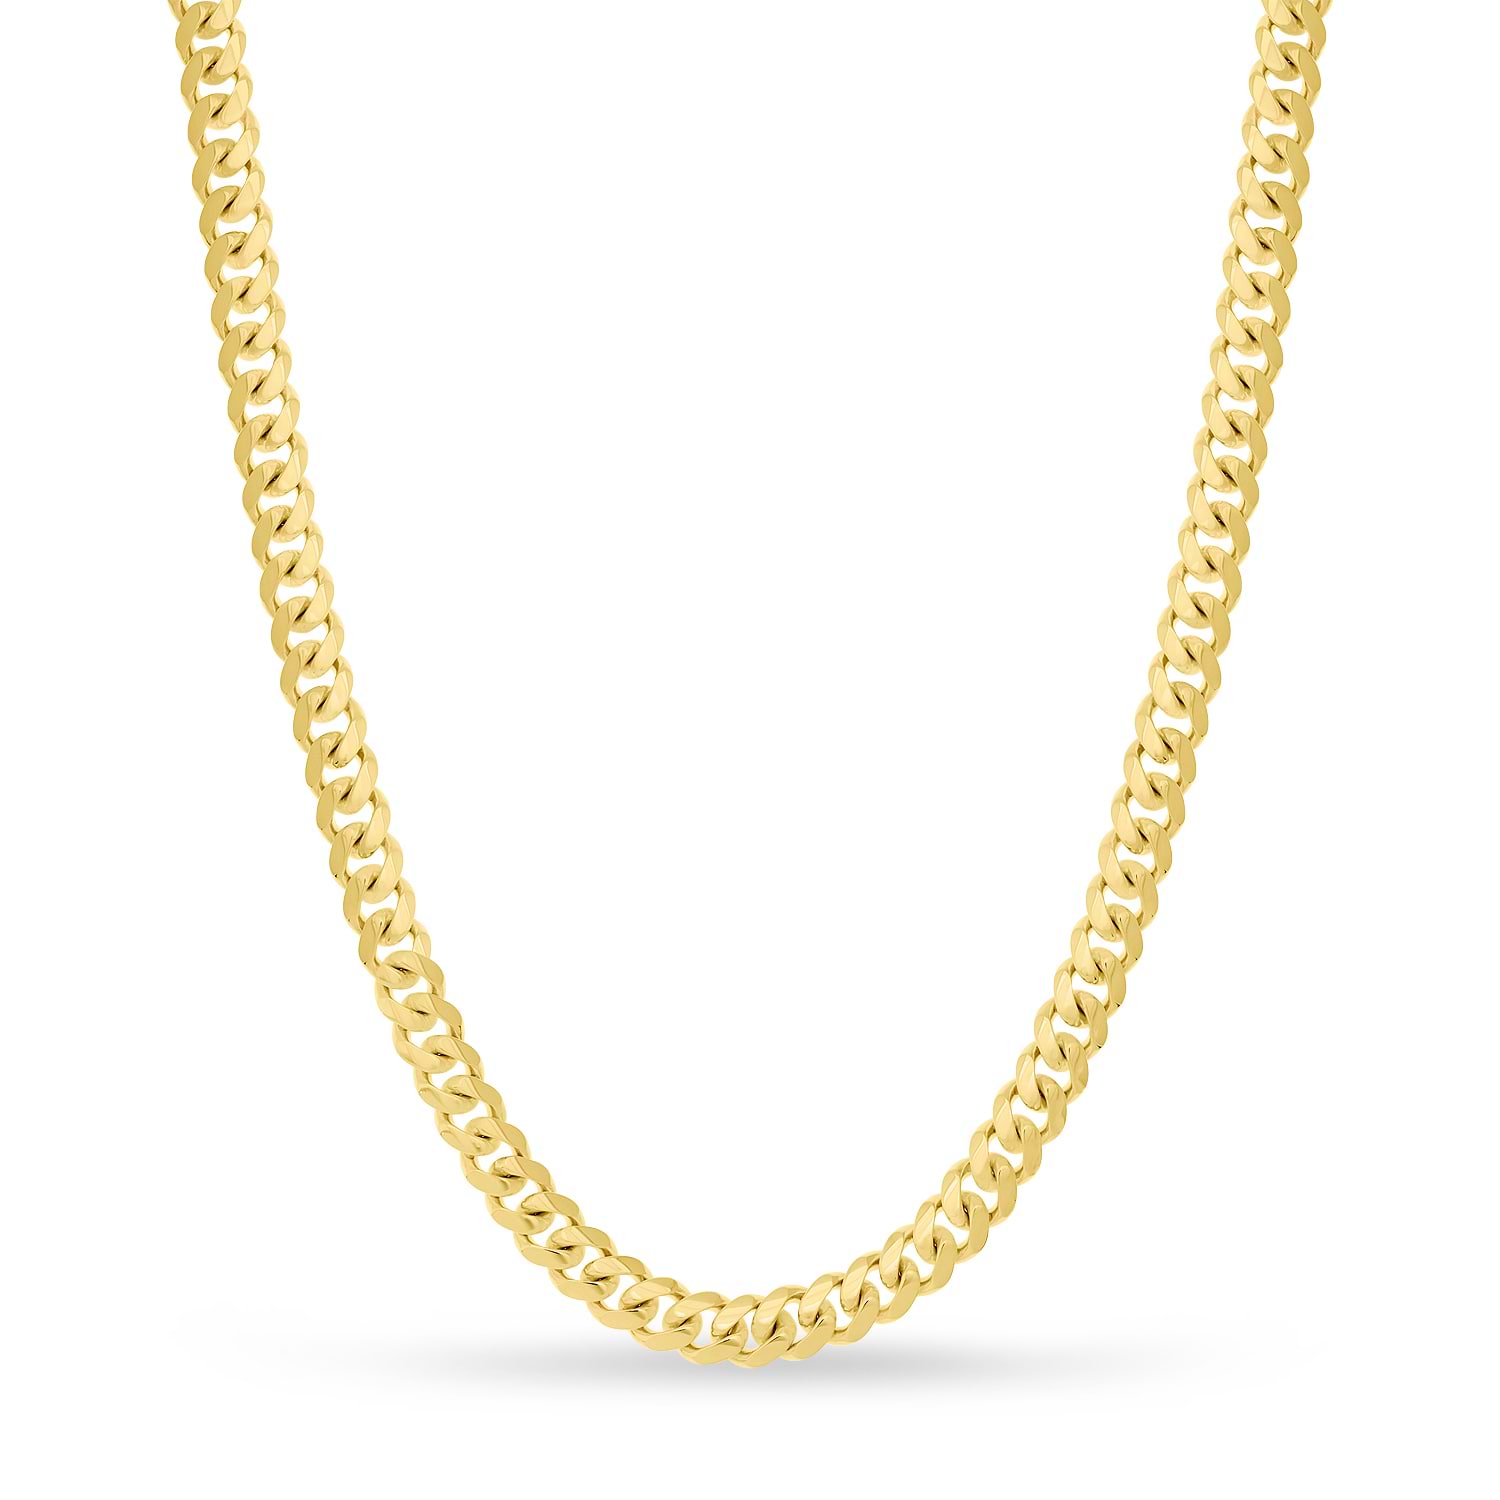 Large Miami Cuban Chain Necklace 14k Yellow Gold